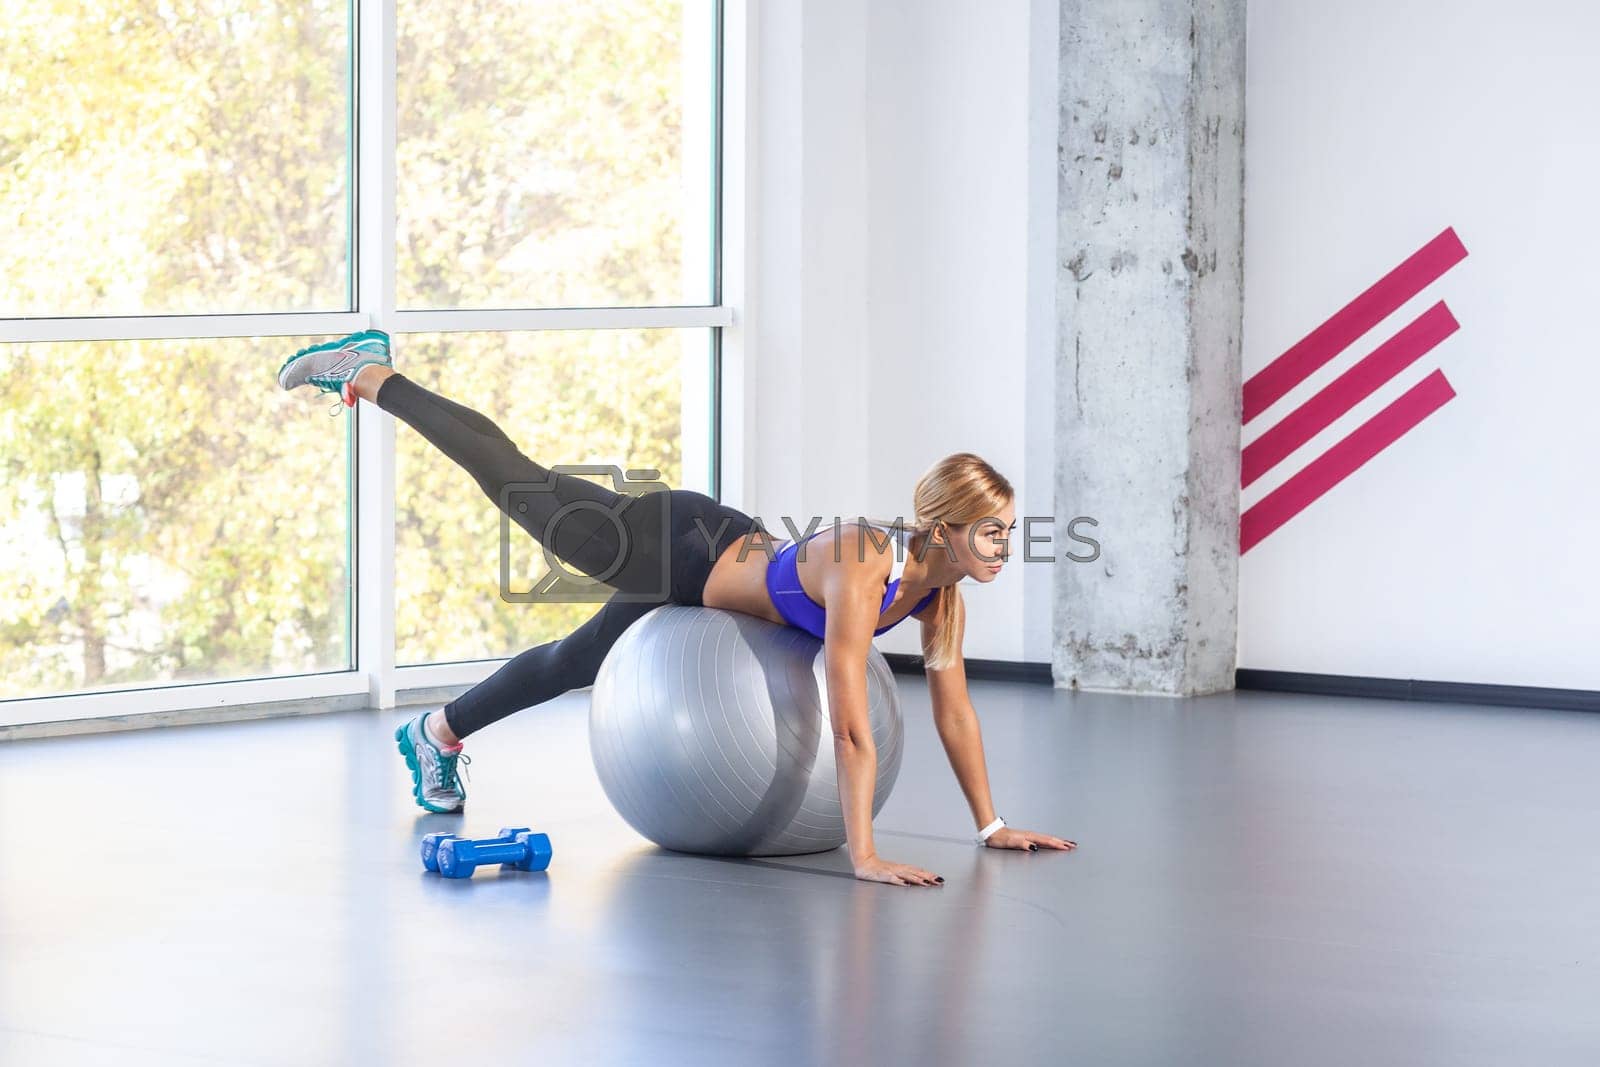 Royalty free image of Woman lying on a fitness ball with palms on floor, raised her leg up, wearing sports top and tights. by Khosro1